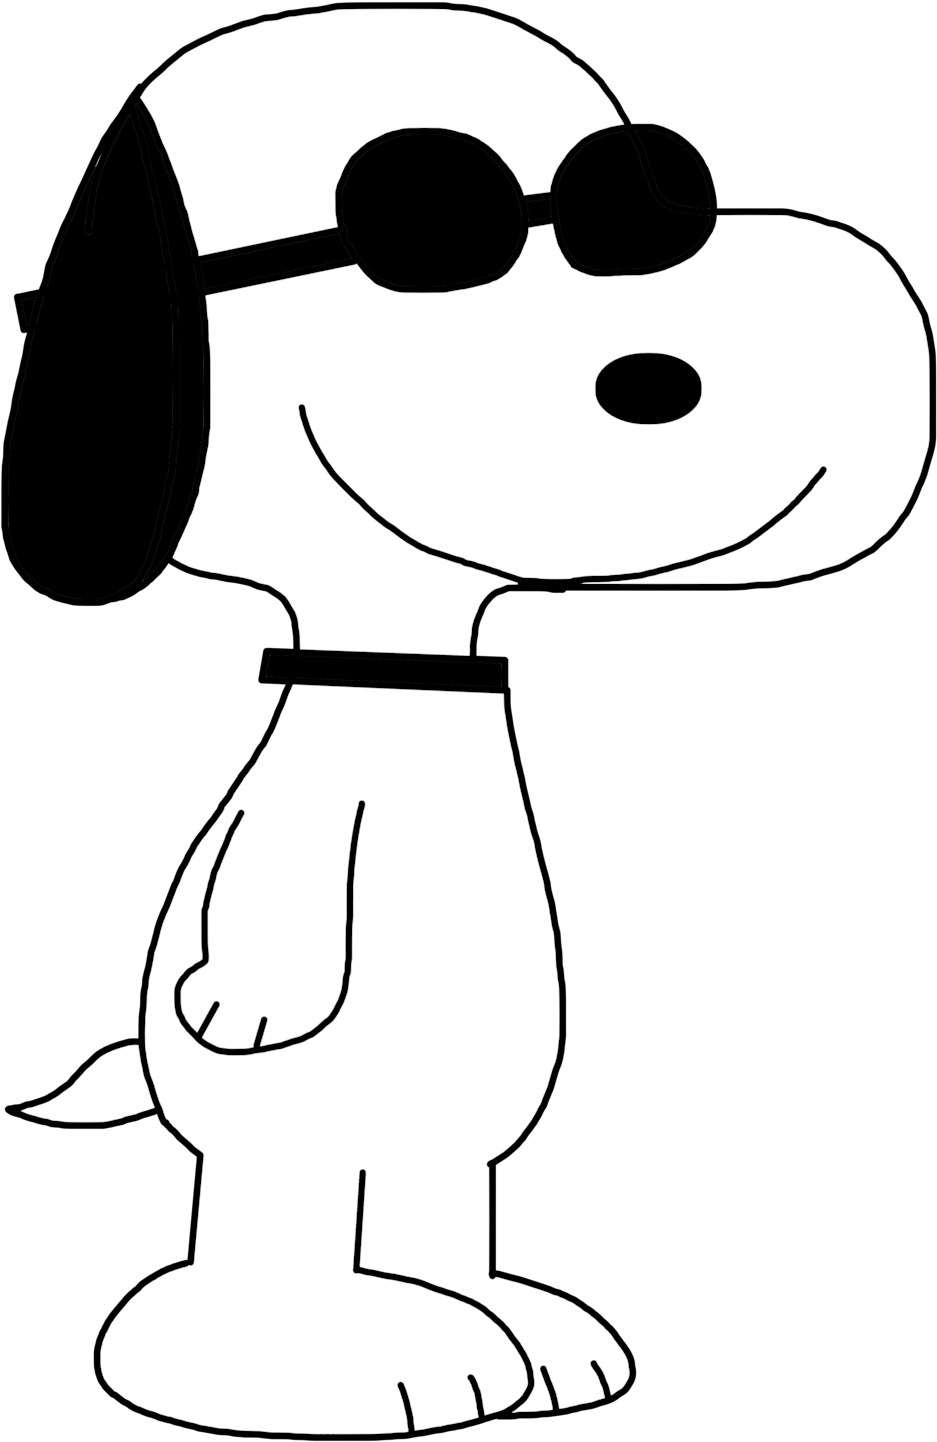 Snoopy Wearing Dark Glass For Summer By Marcospower1996 - Swag Png (1600x1600)